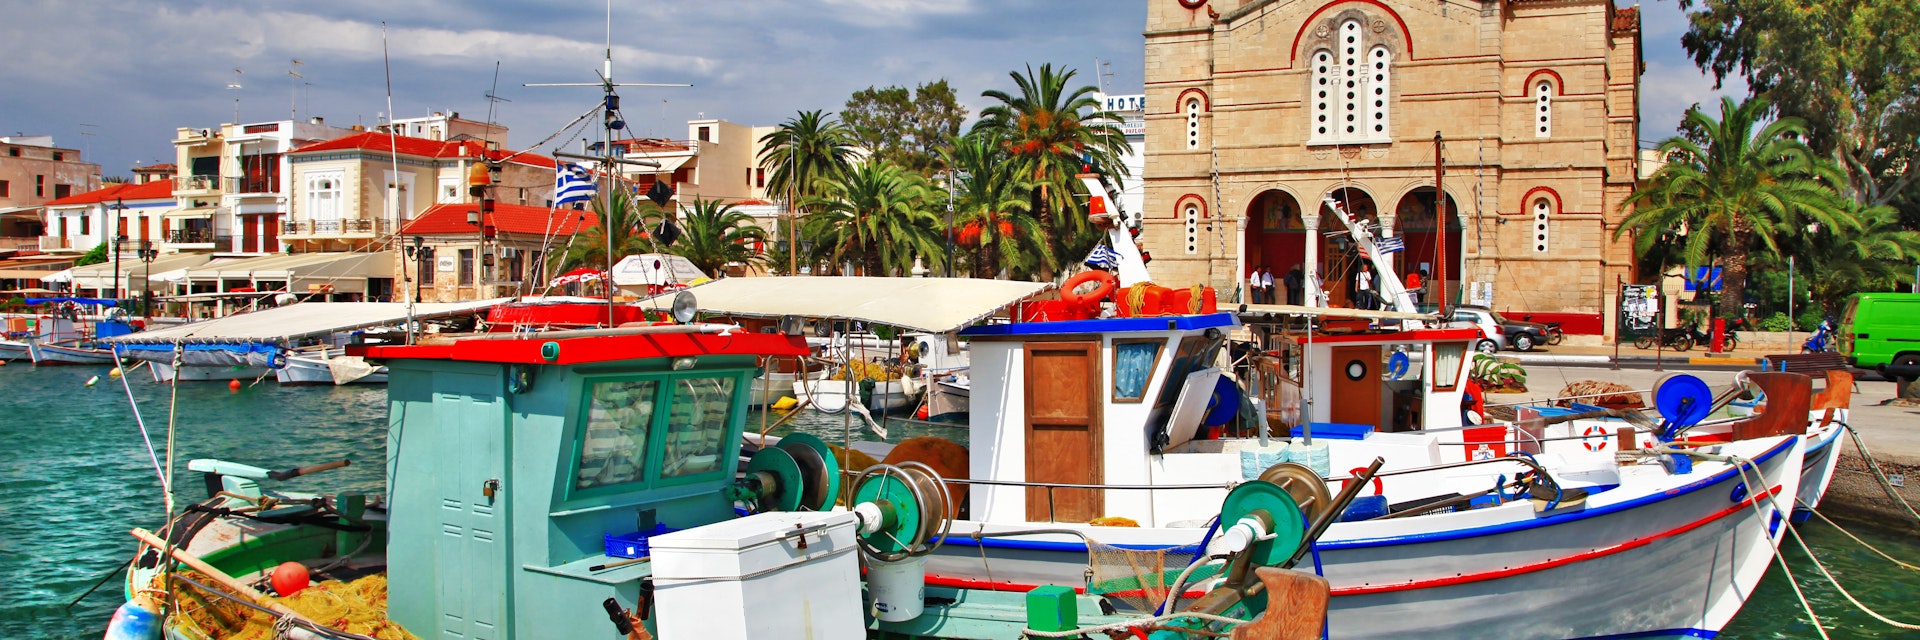 Colourful boats docked at the Port of Aegina.